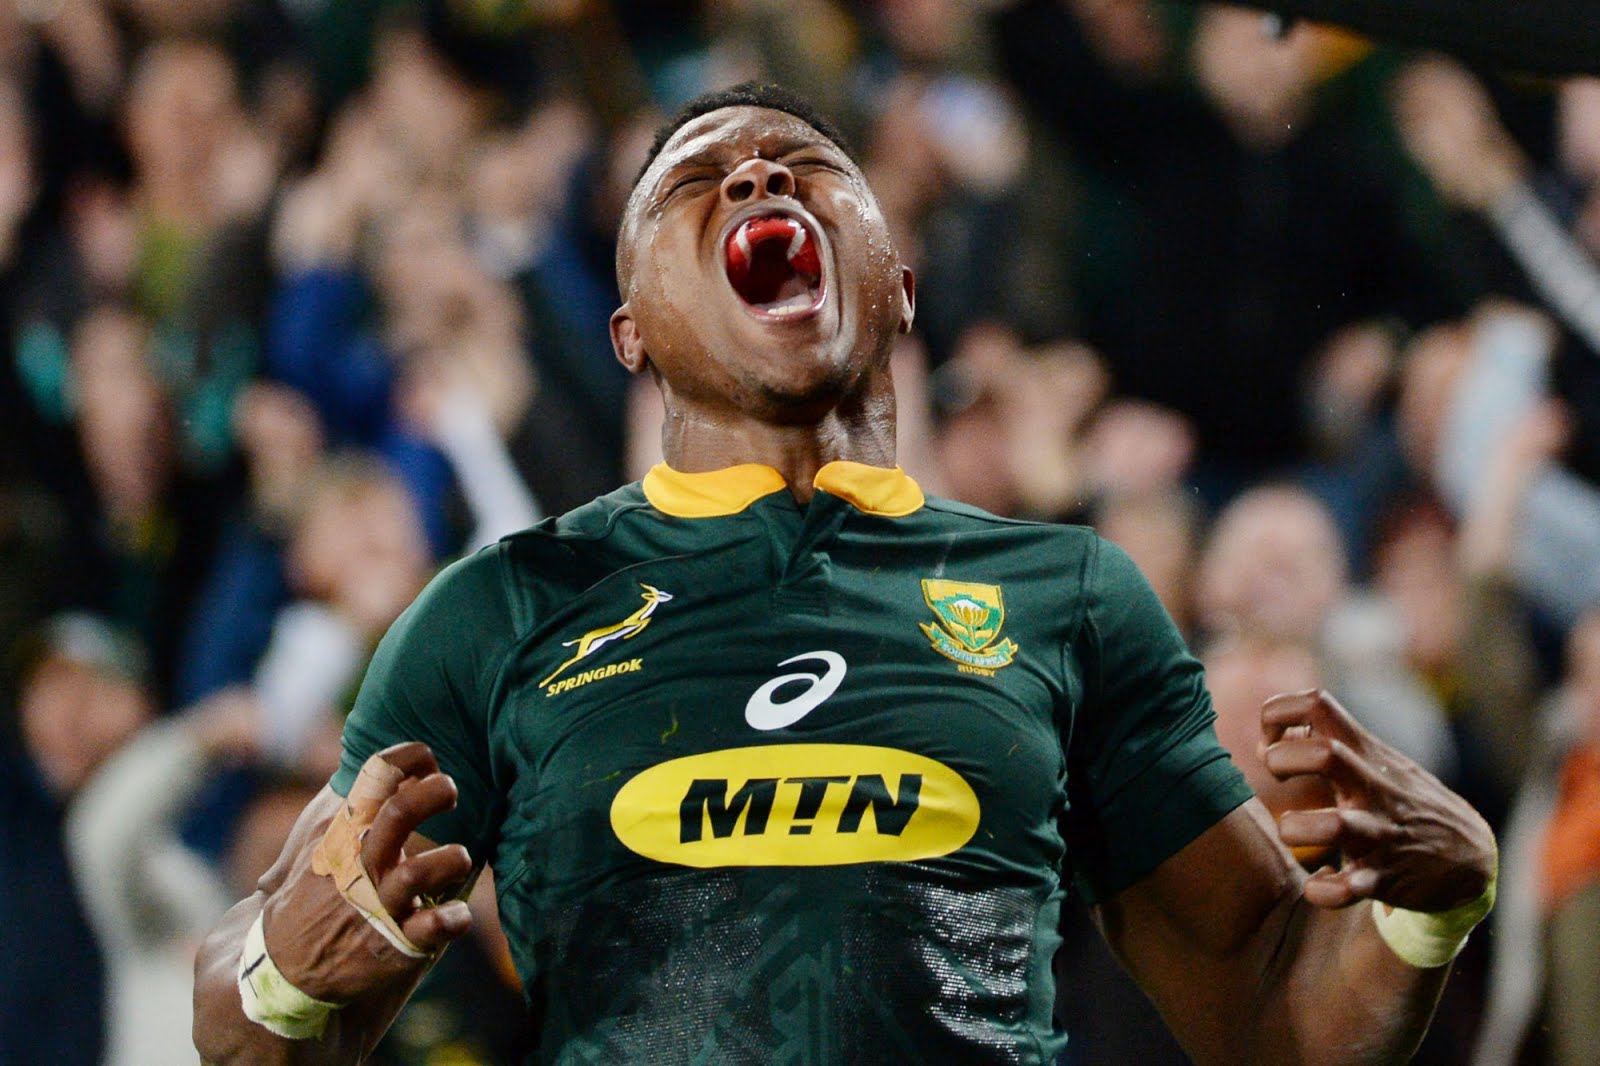 Aphiwe Dyanti celebrates scoring a try for the Springboks